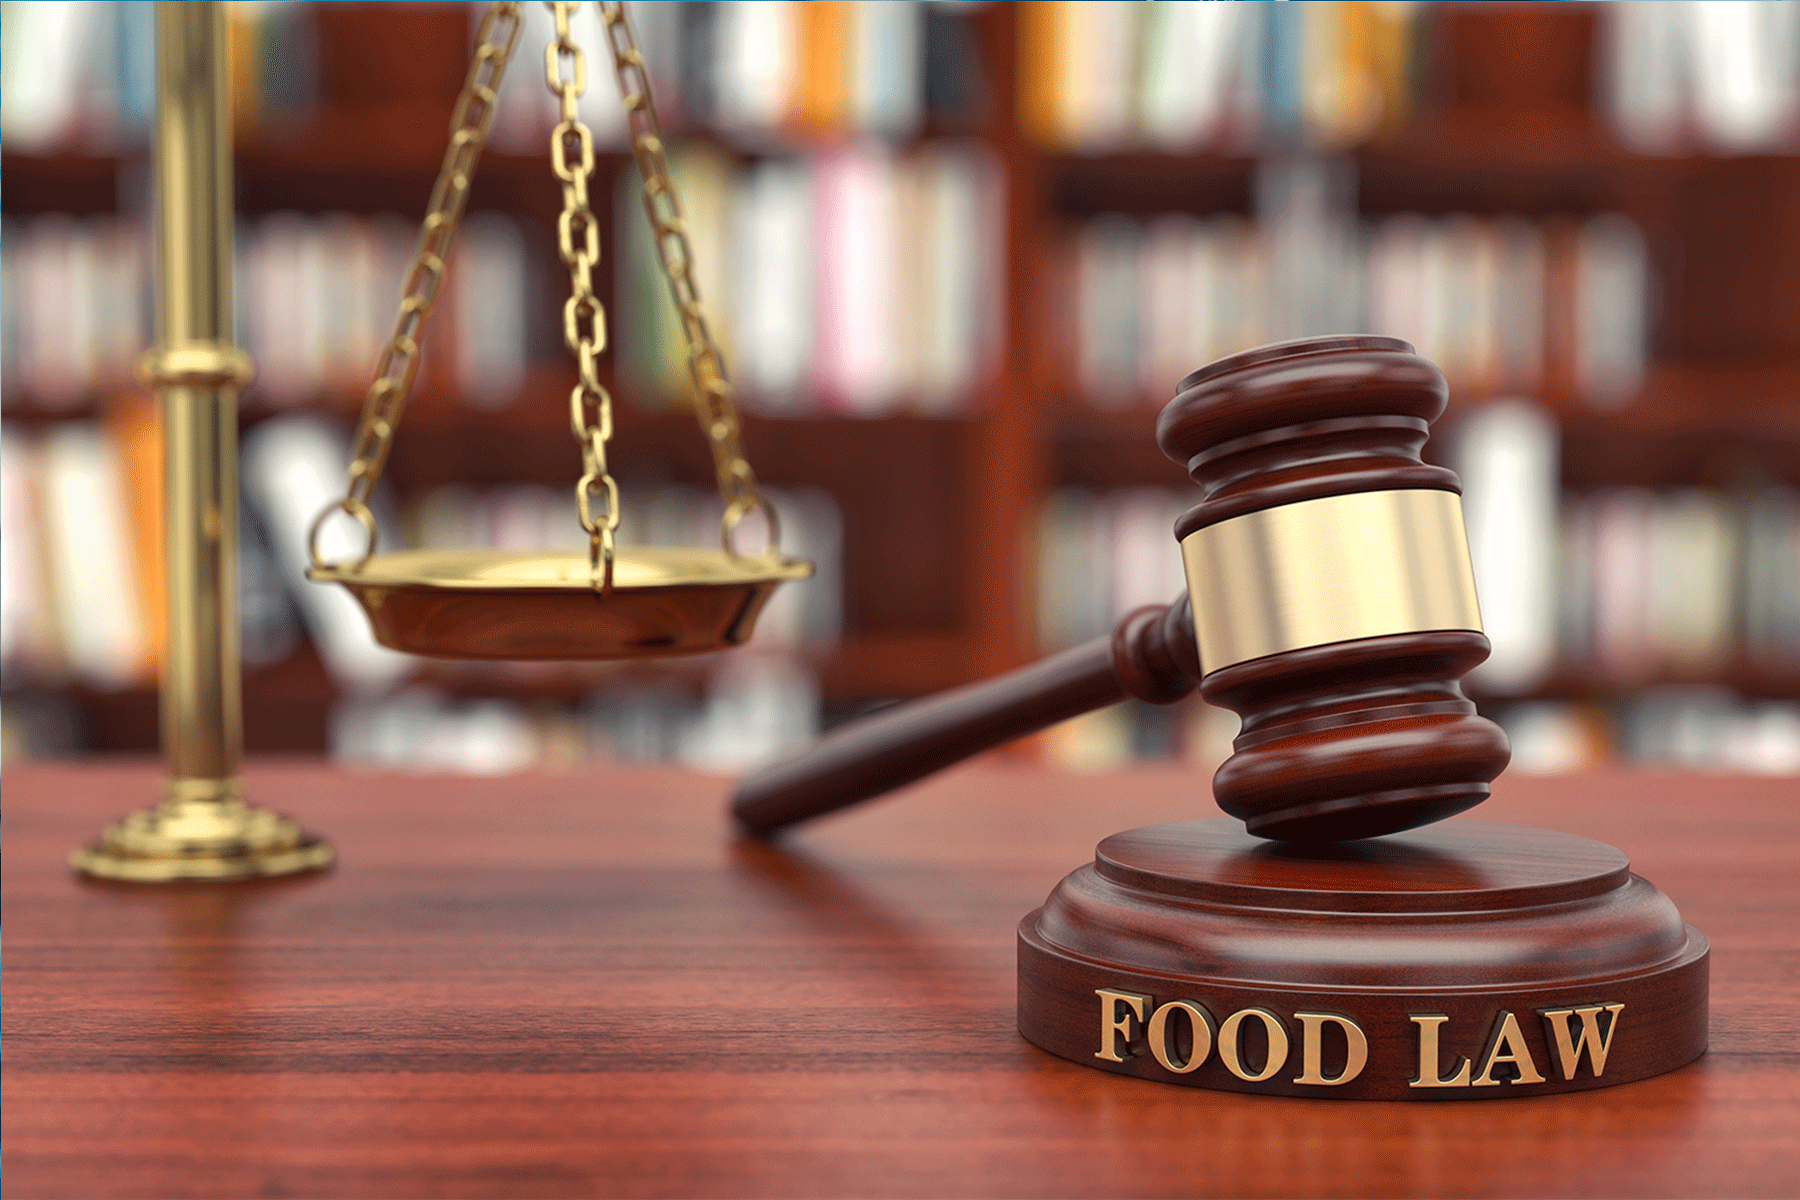 Food Regulations—What is the Current Scenario in India?